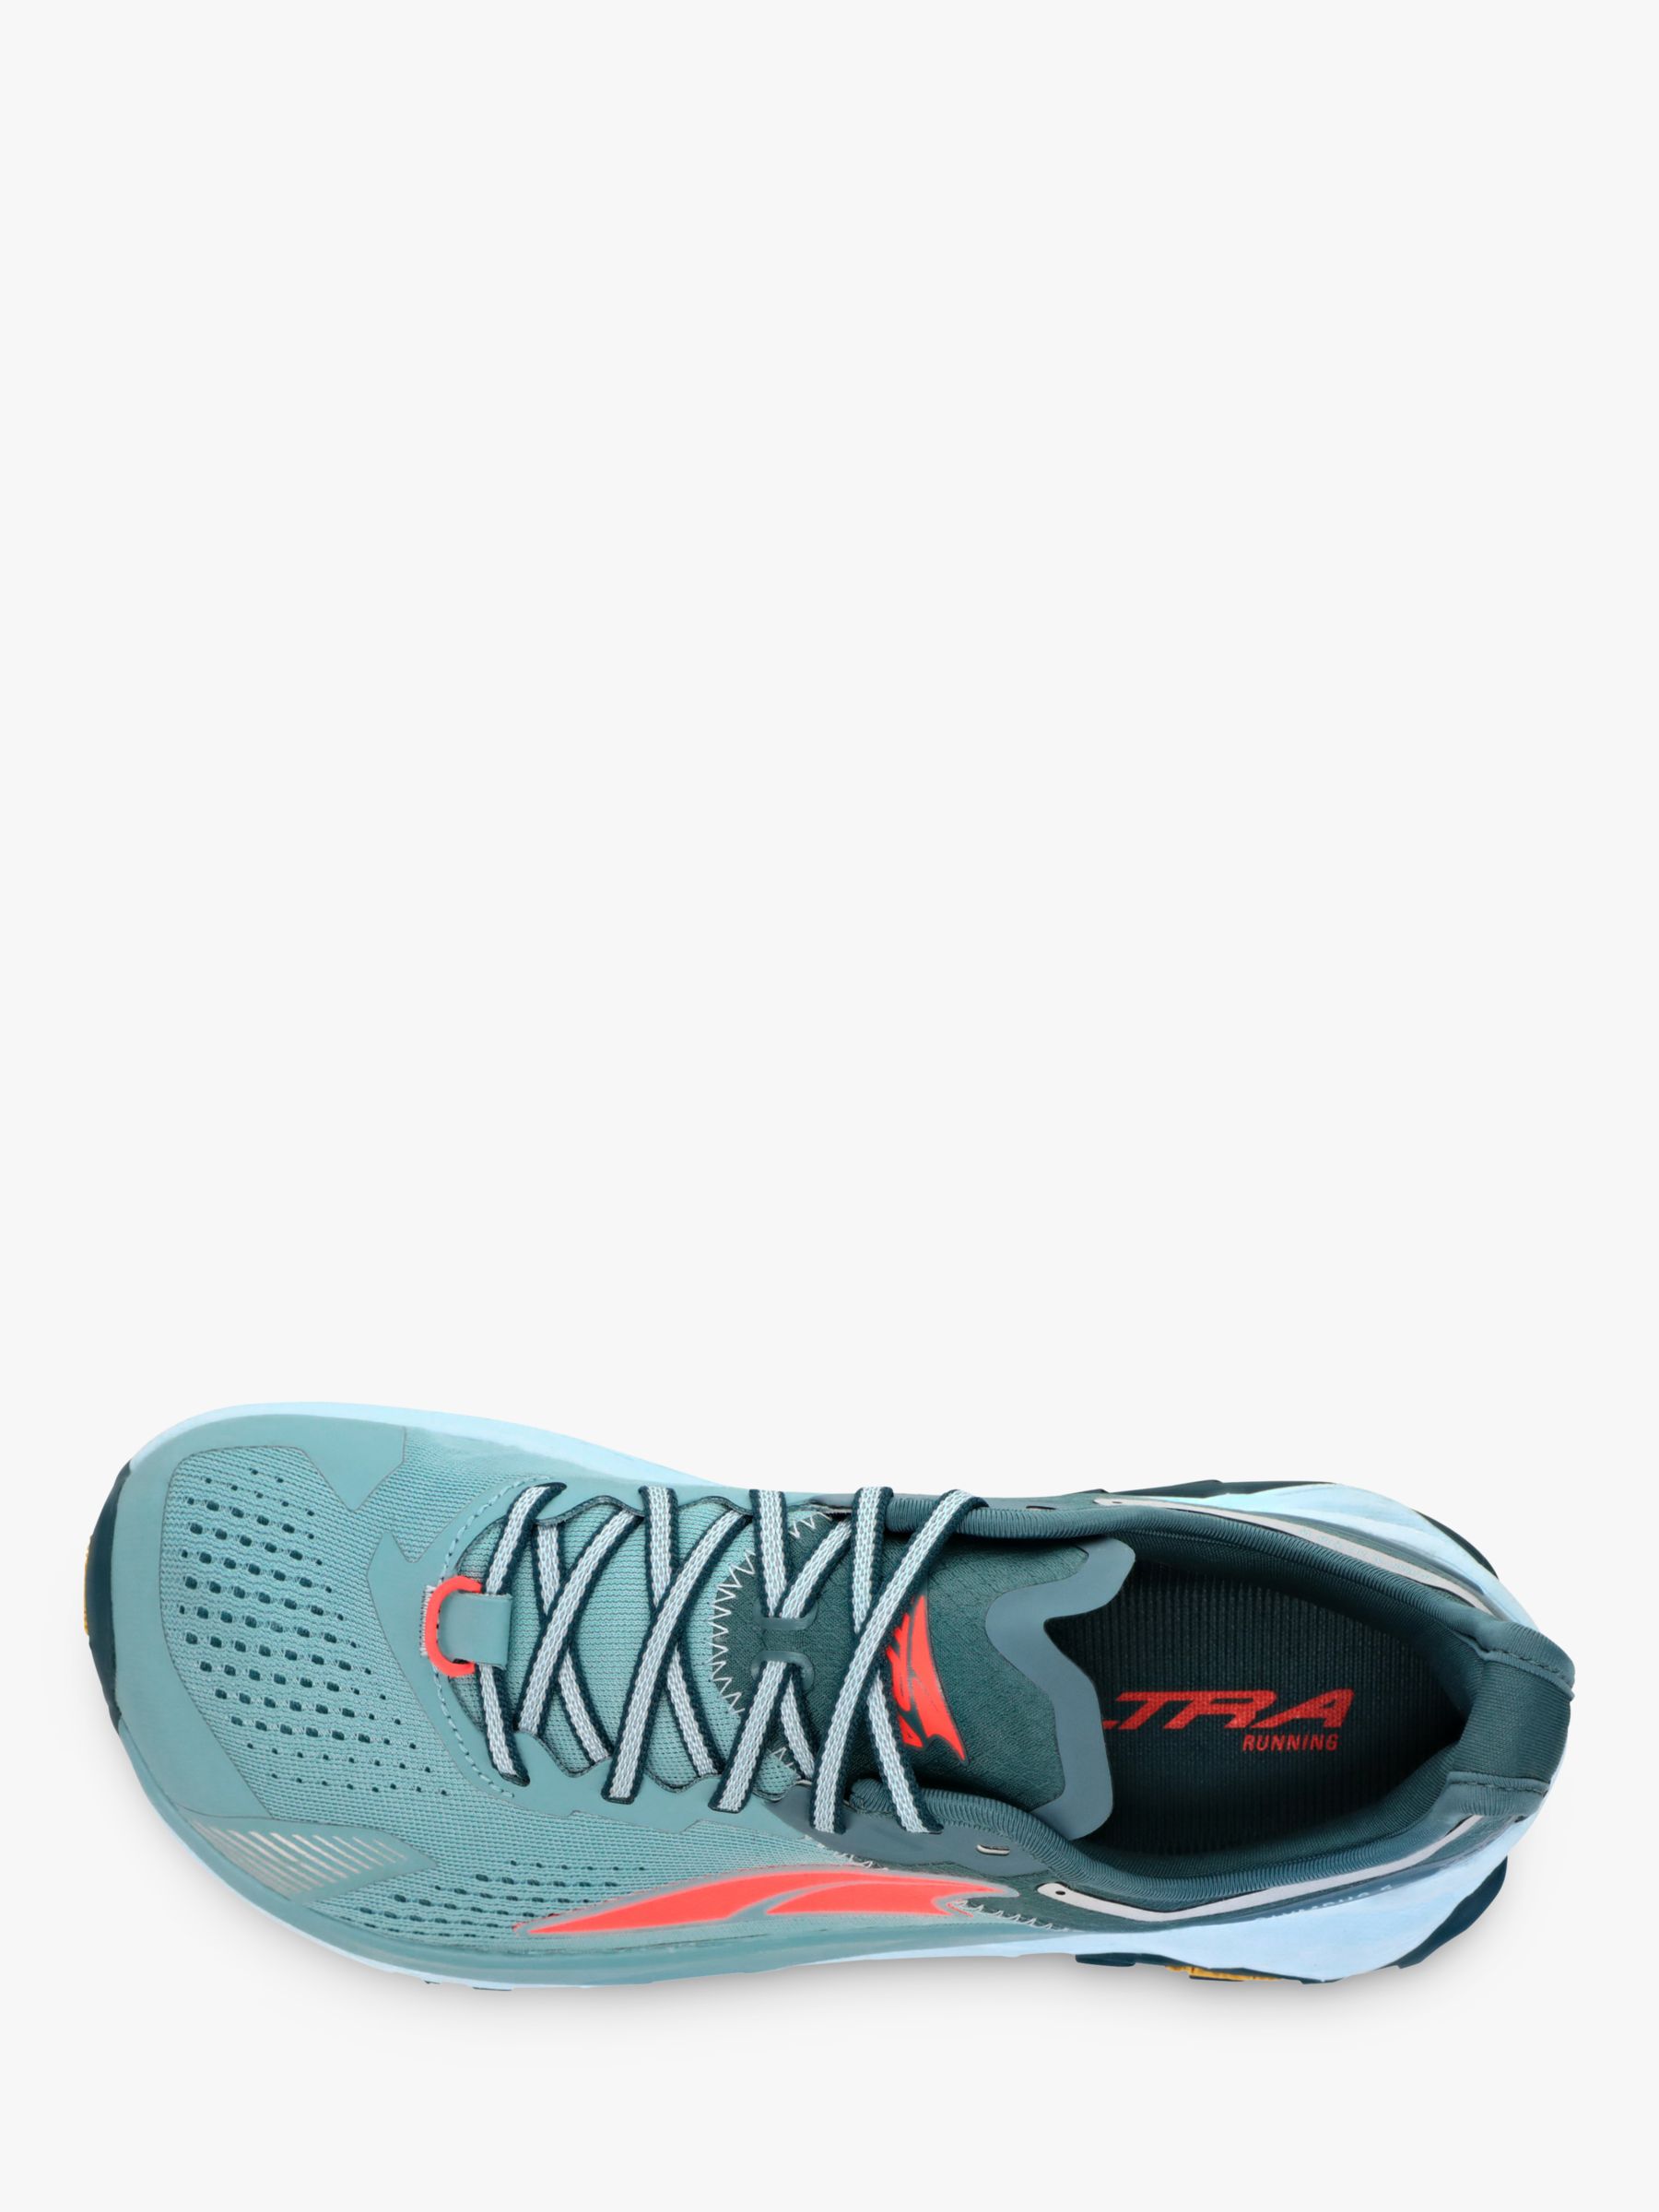 Altra Olympus 5 Women's Trail Running Shoes